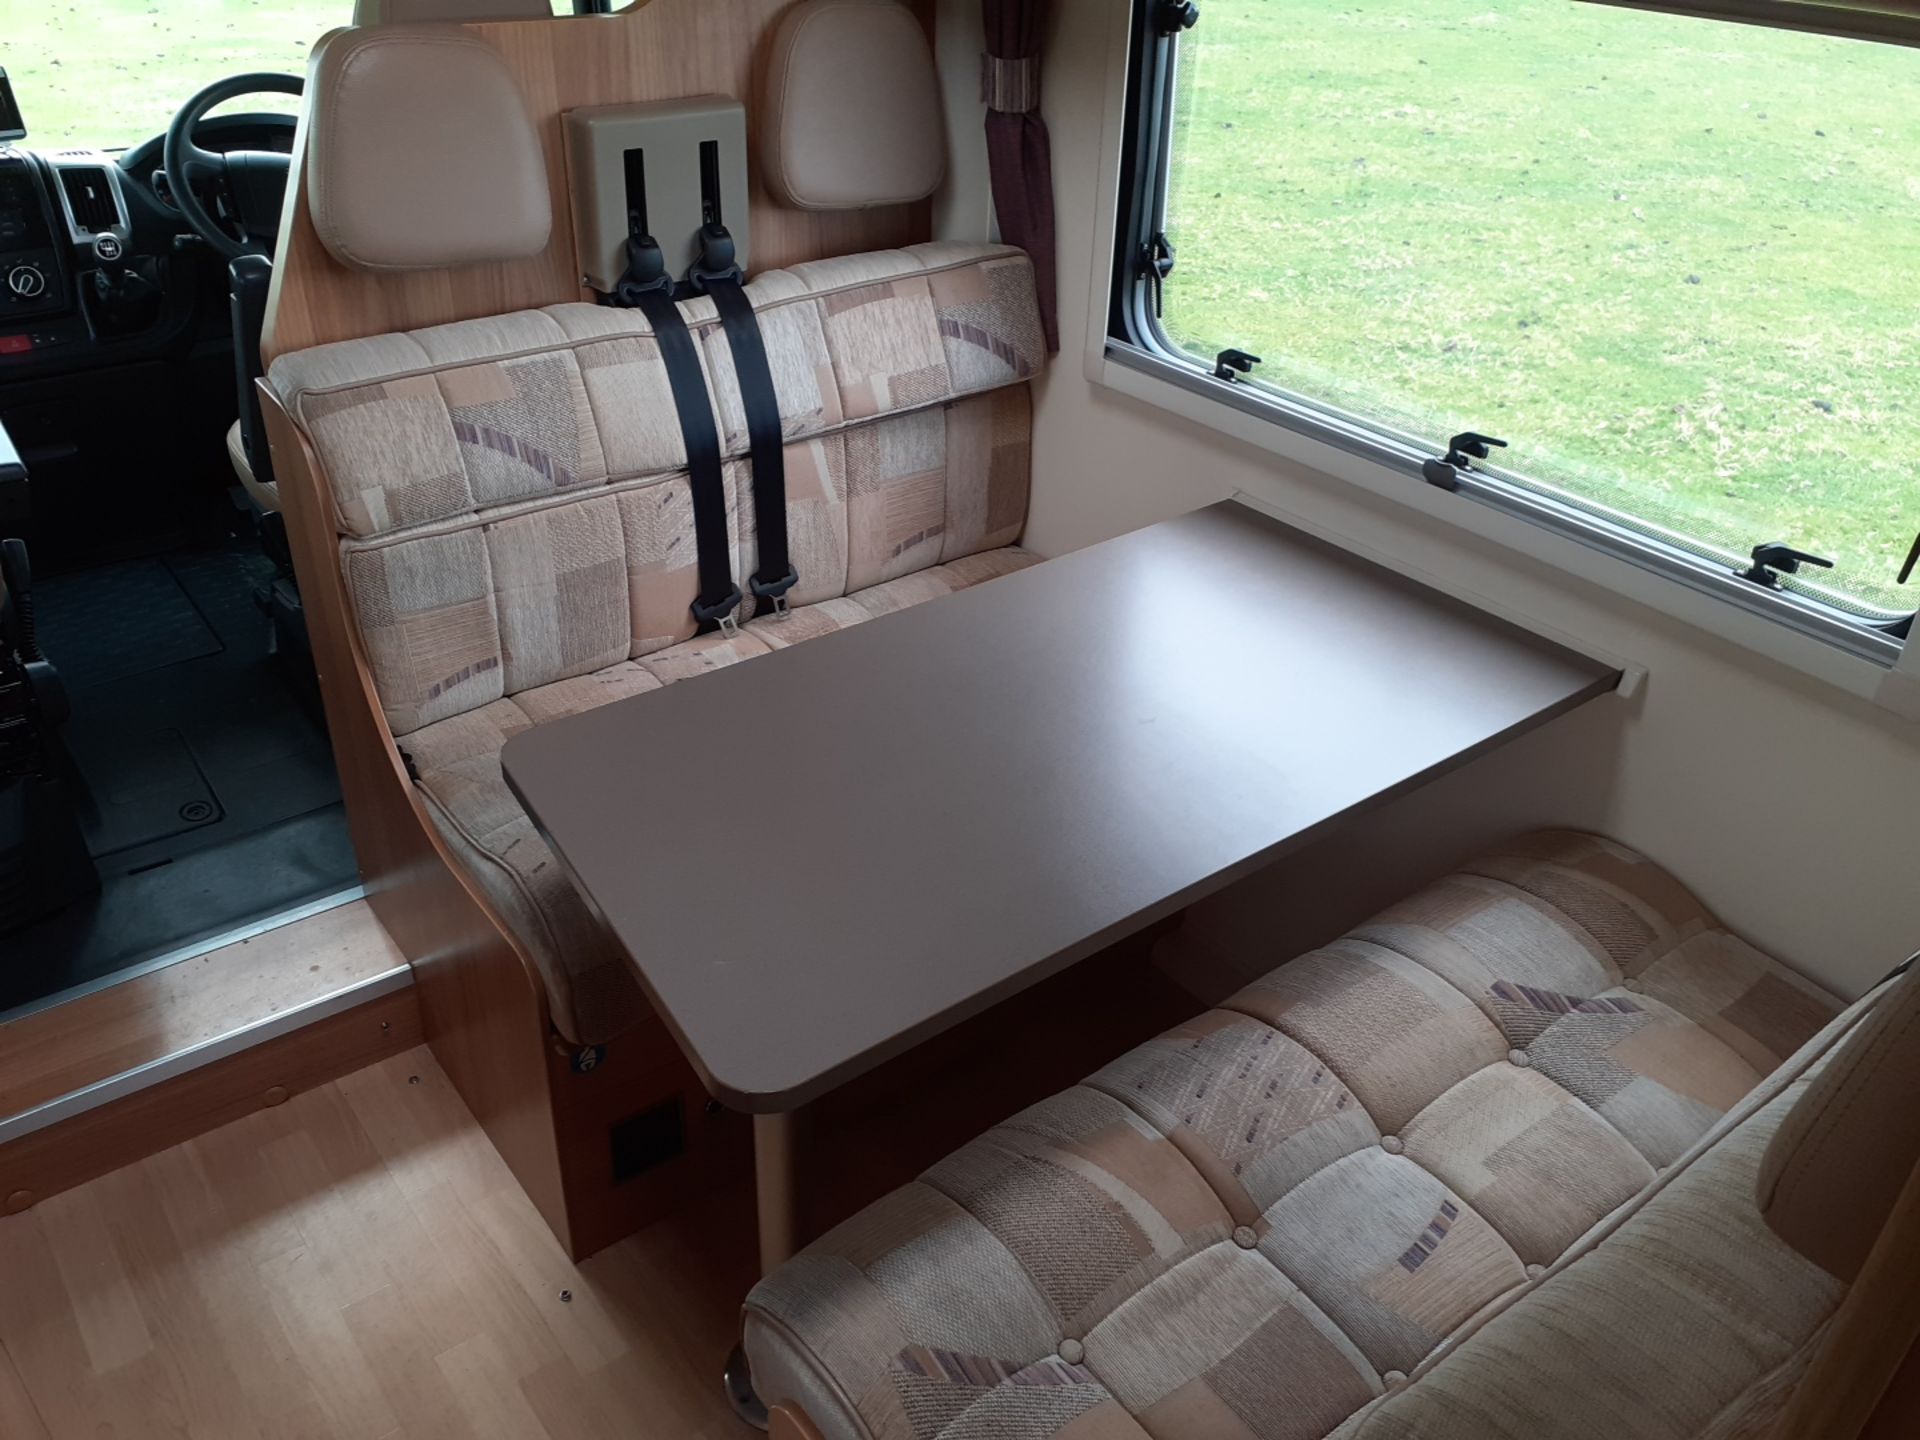 2012 BAILEY APPROACH 760 SE LUXURY 6 BERTH MOTORHOME £10K OF EXTRAS, 30,000 MILES FROM NEW - Image 15 of 31